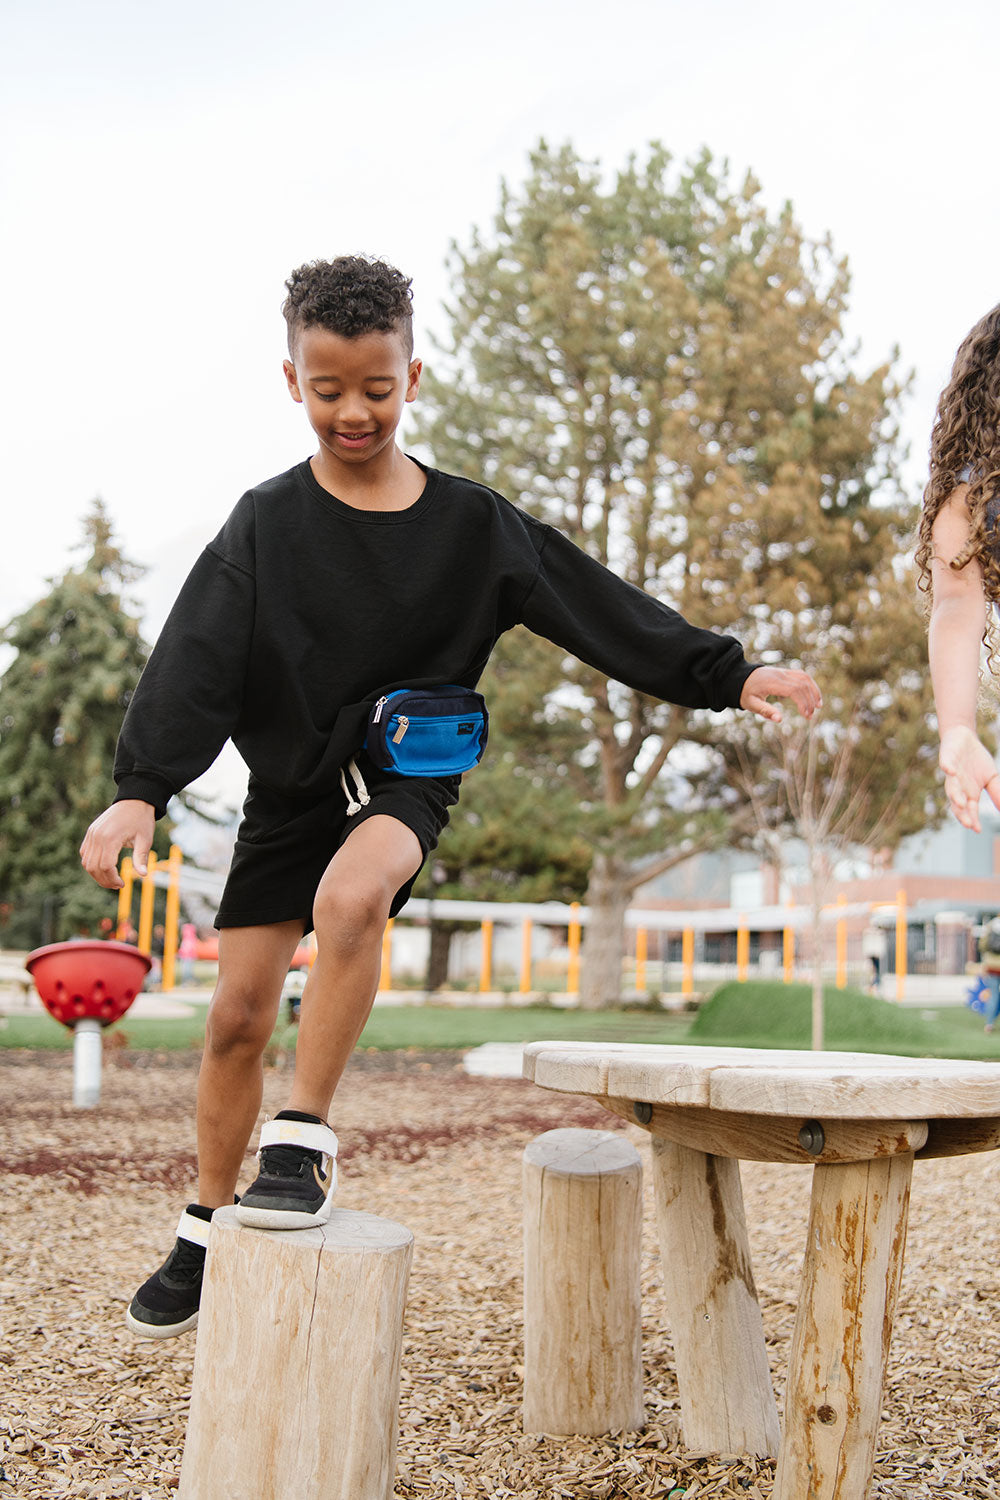 Young boy playing in a park in Everyway activewear. Featuring fanny pack in blue